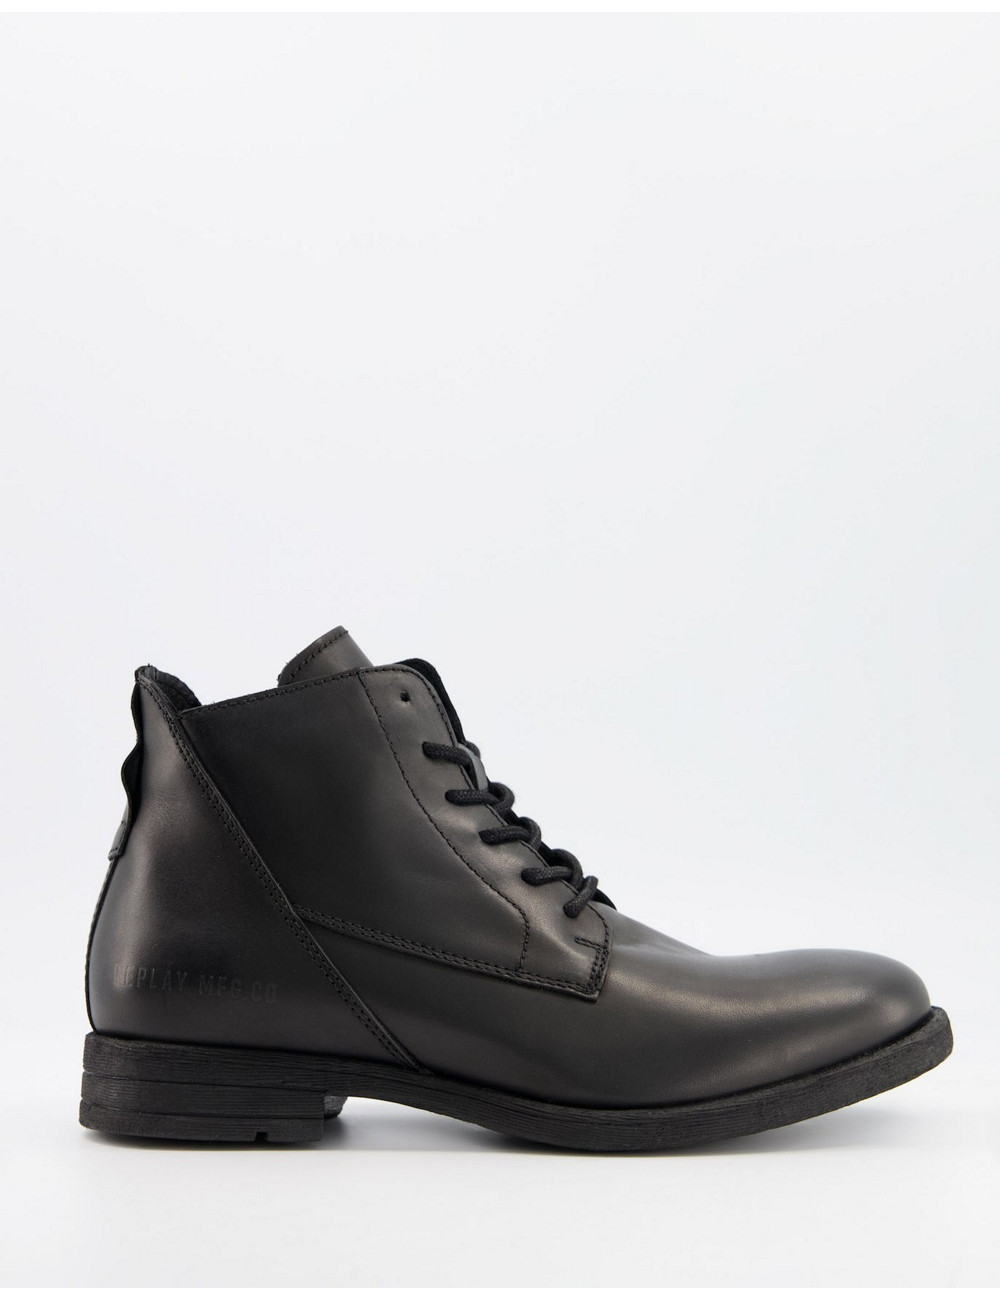 Replay leather lace up boots